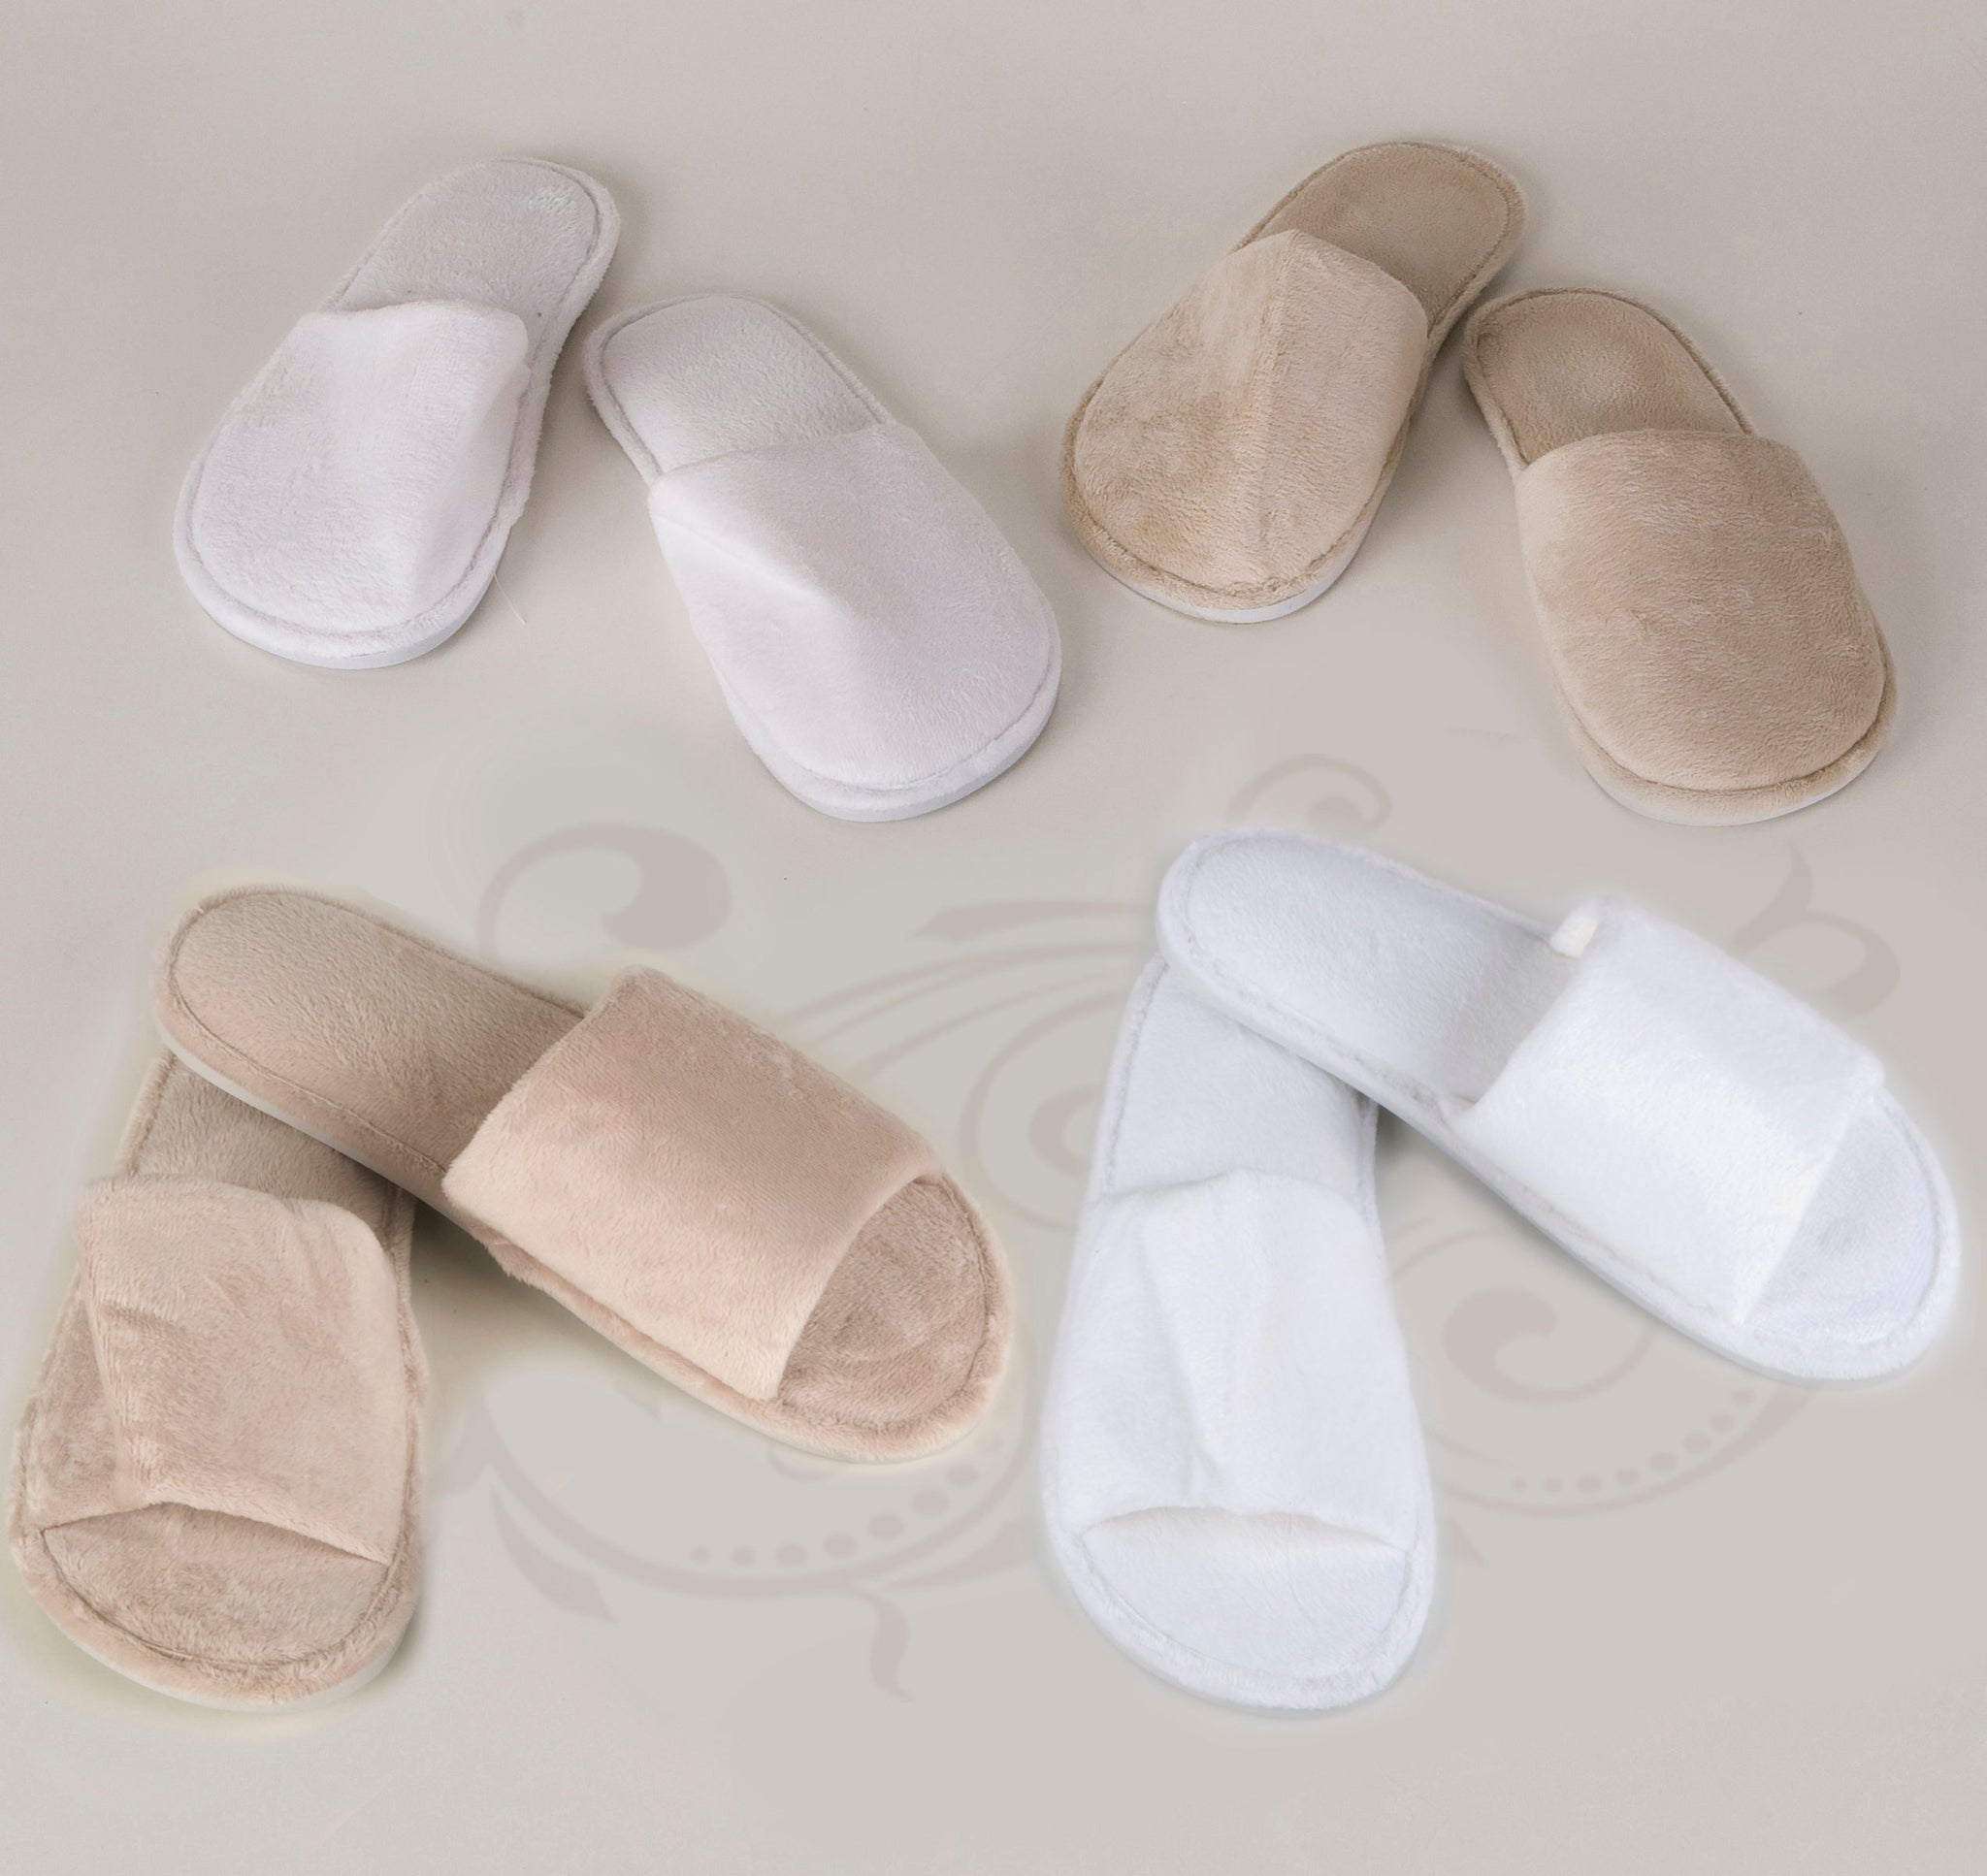 Hotel slippers (Dobby or Waffle) with open / closed toe, logo